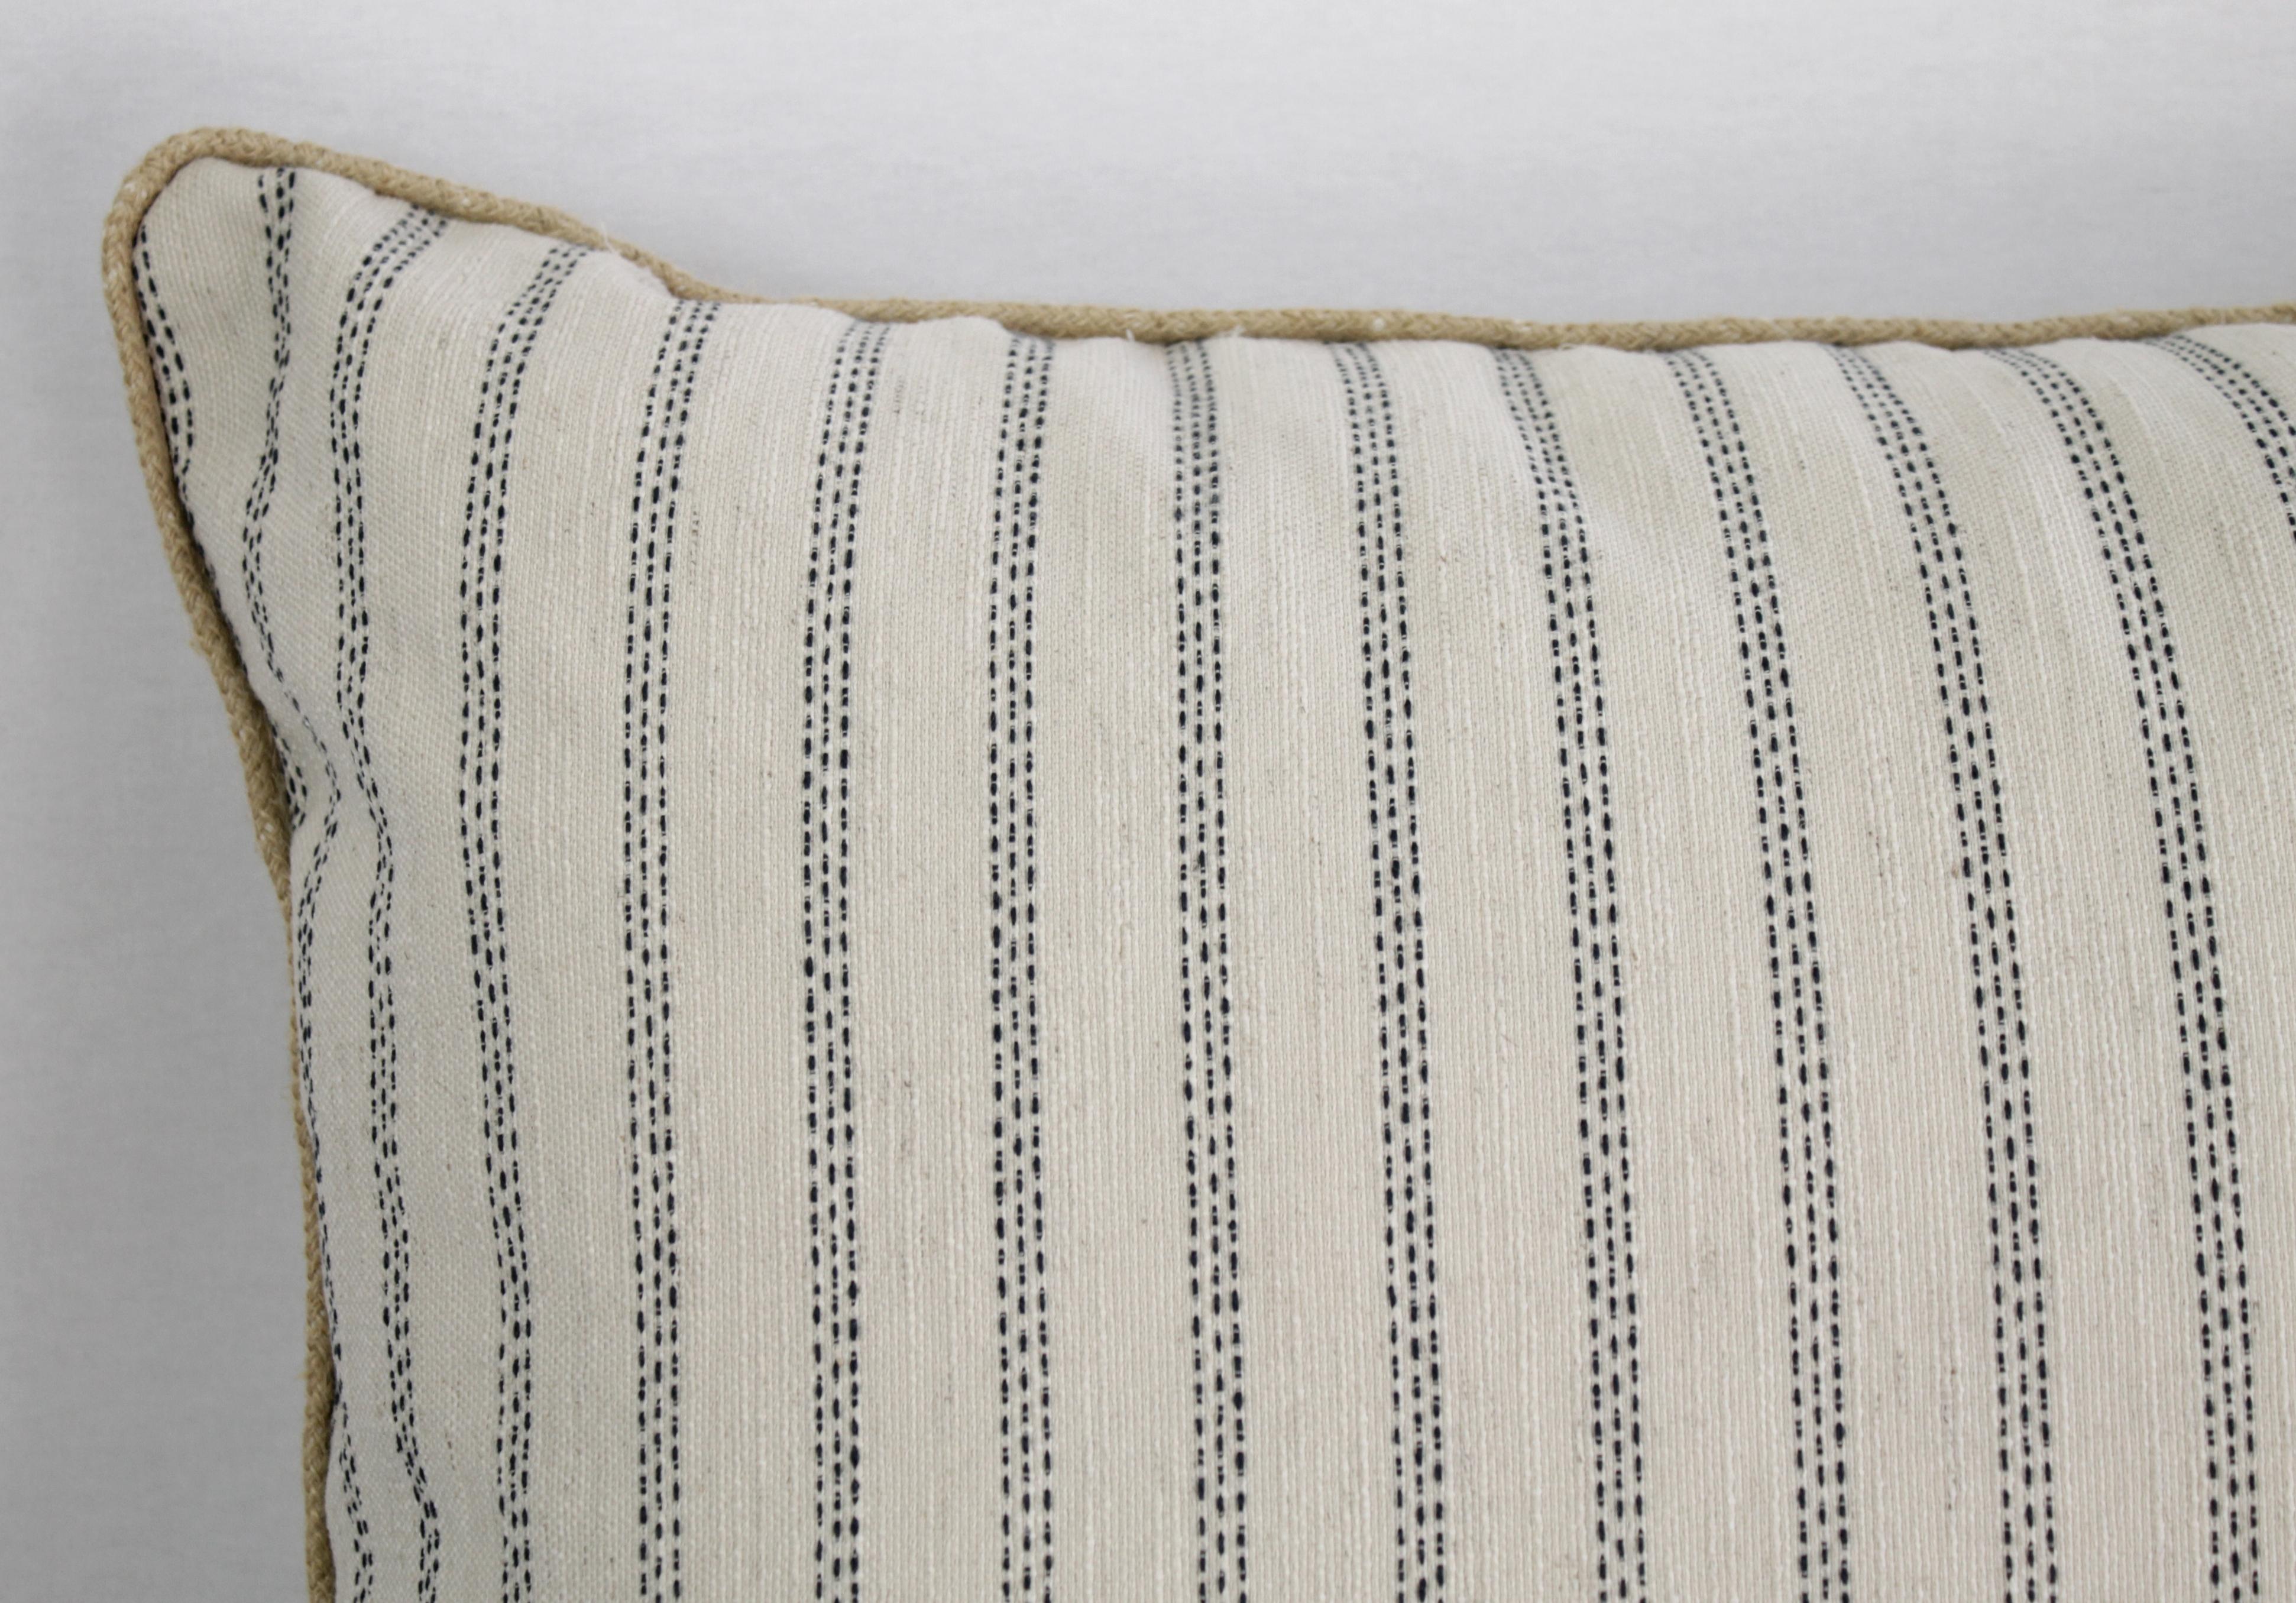 Custom natural and navy ticking stripe pillow with braided jute cord
Zipper closure, machine washable.
Measures: 26 x 26
No insert is included.